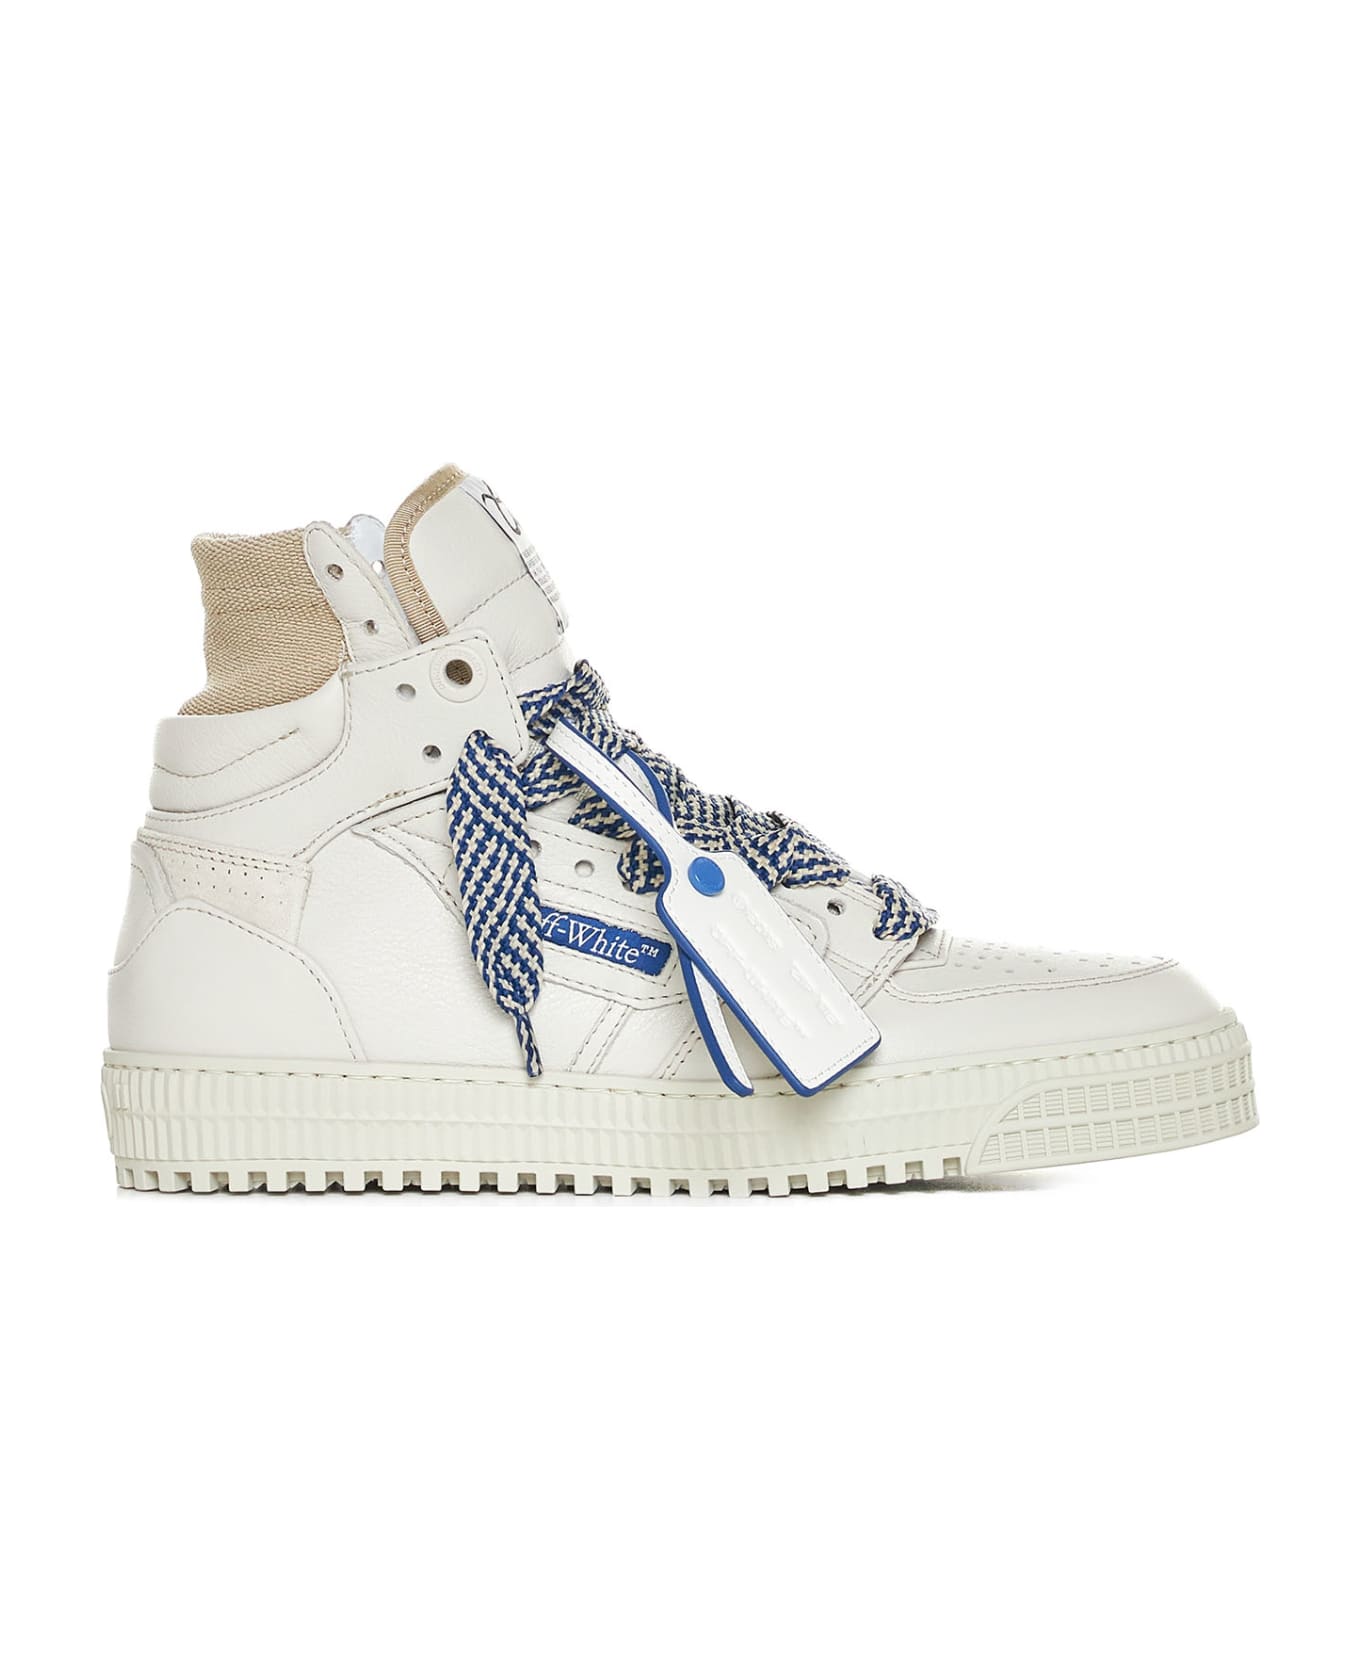 Off-White 3.0 Off-court Lace-up Sneakers - Cream navy bl